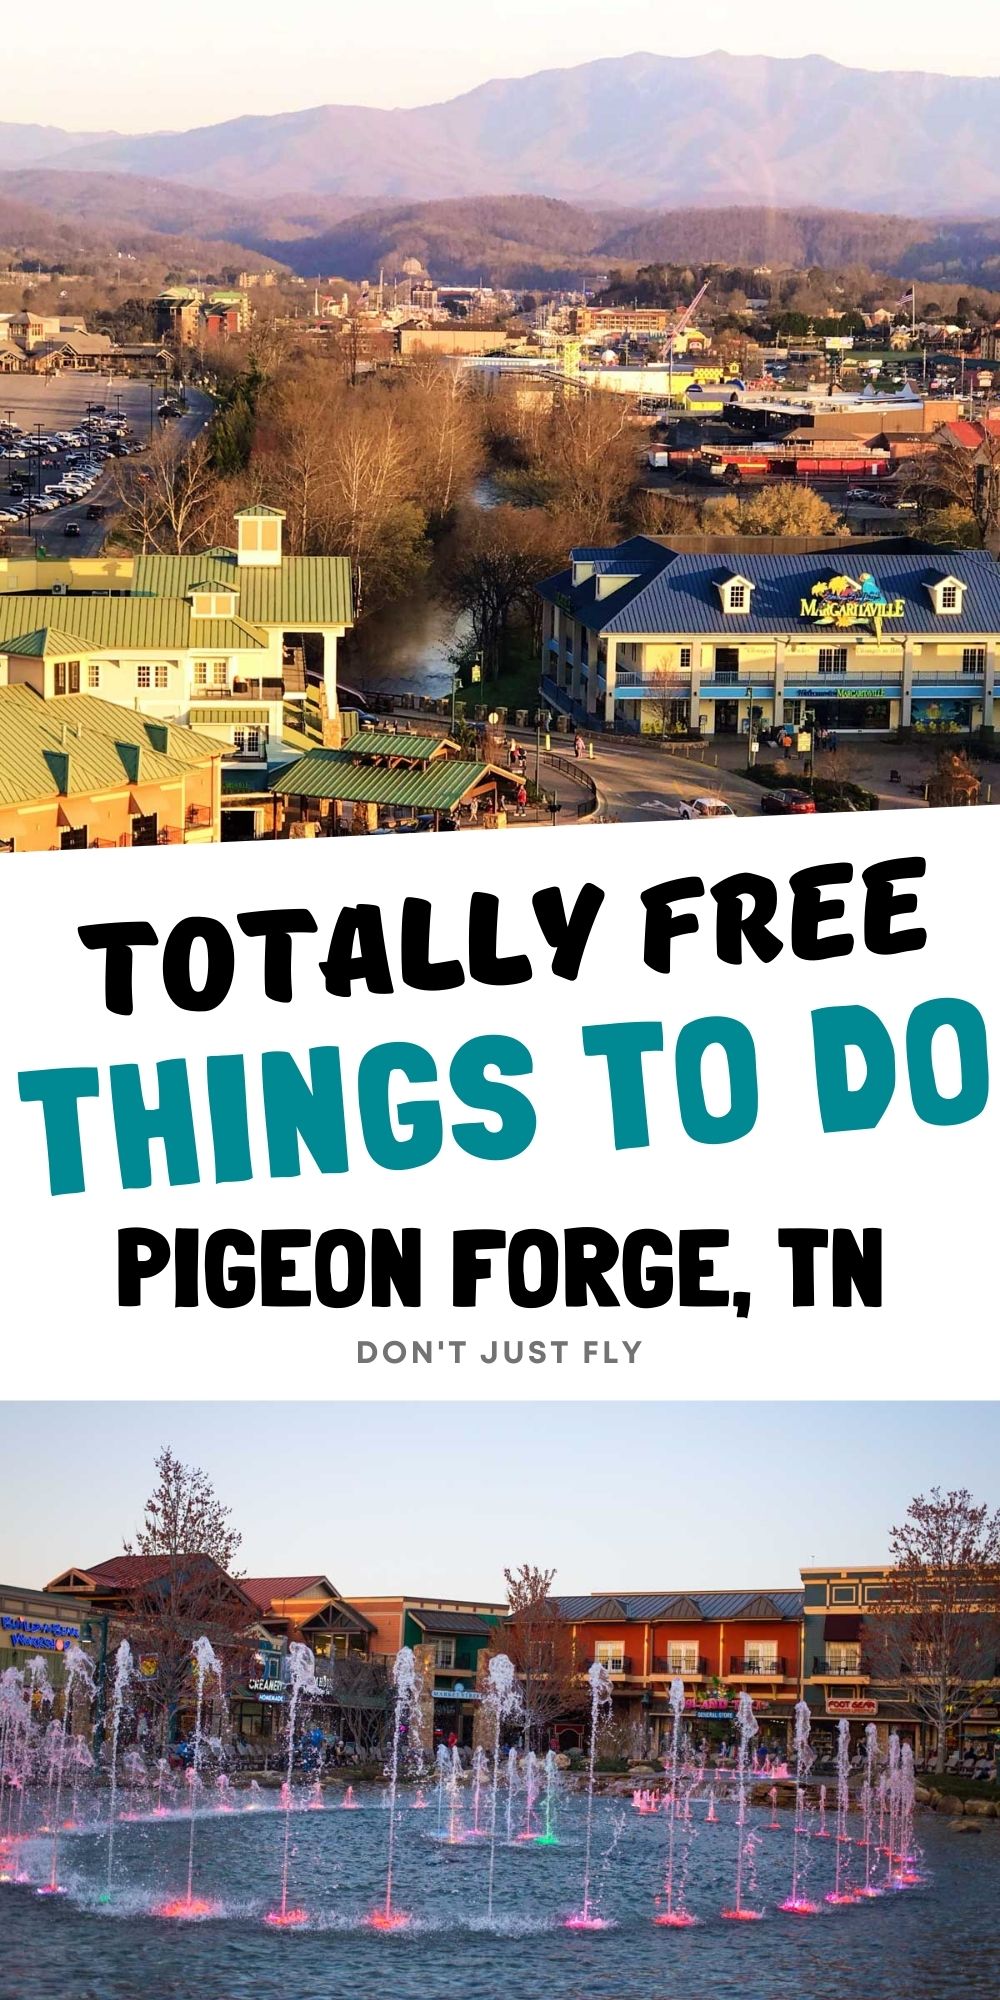 A photo collage shows scenes from Pigeon Forge.